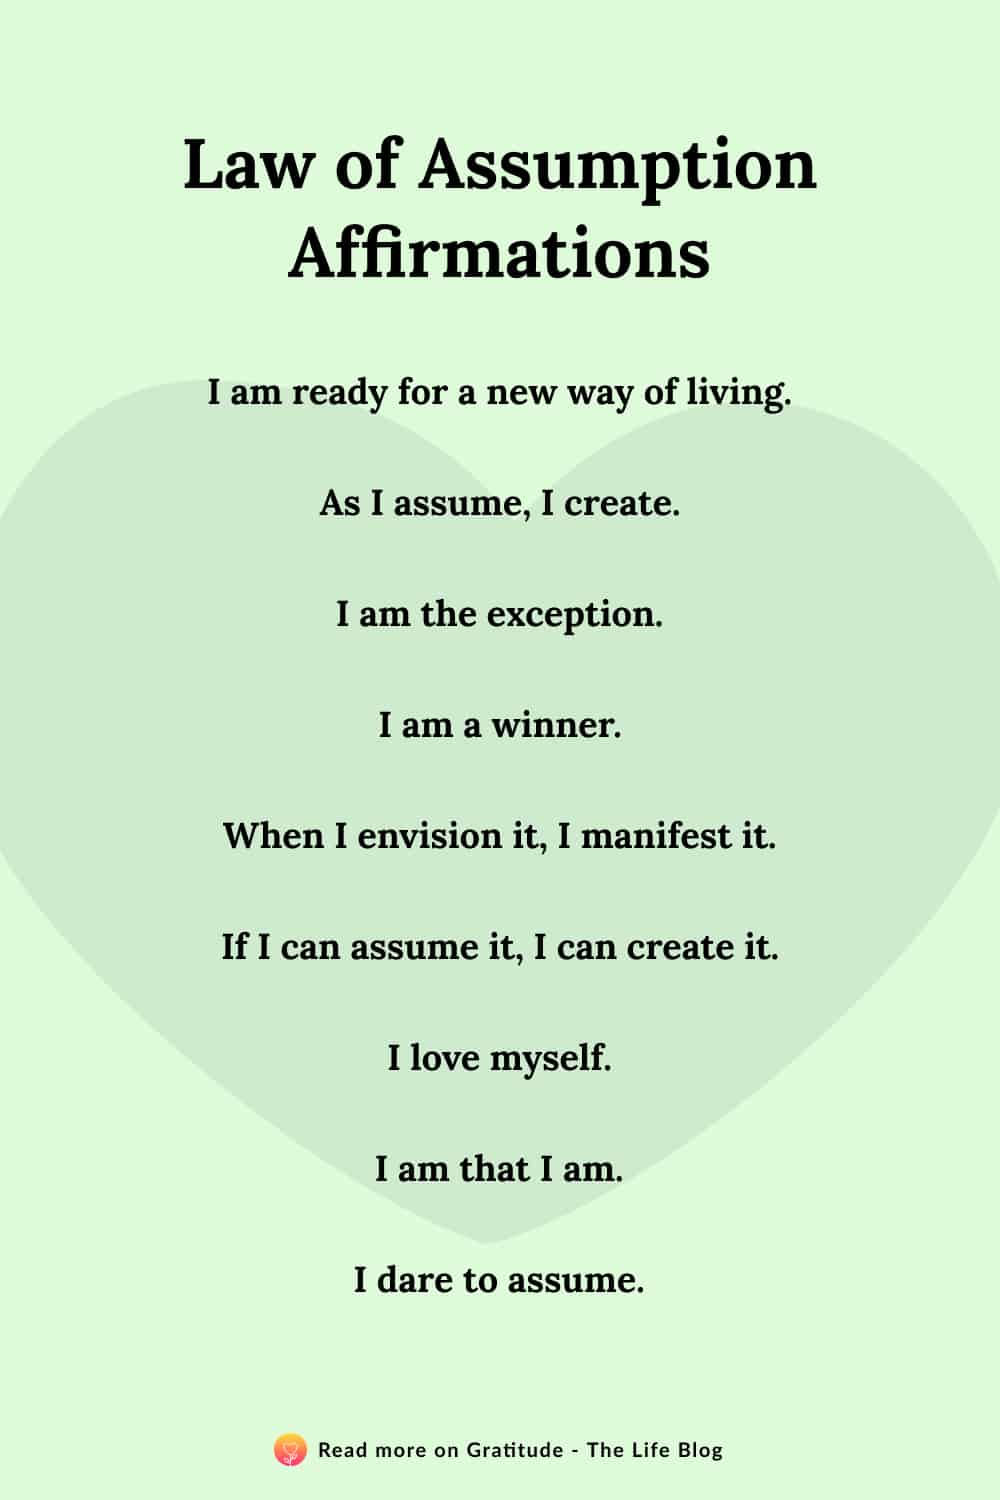 Image with list of law of assumption affirmations